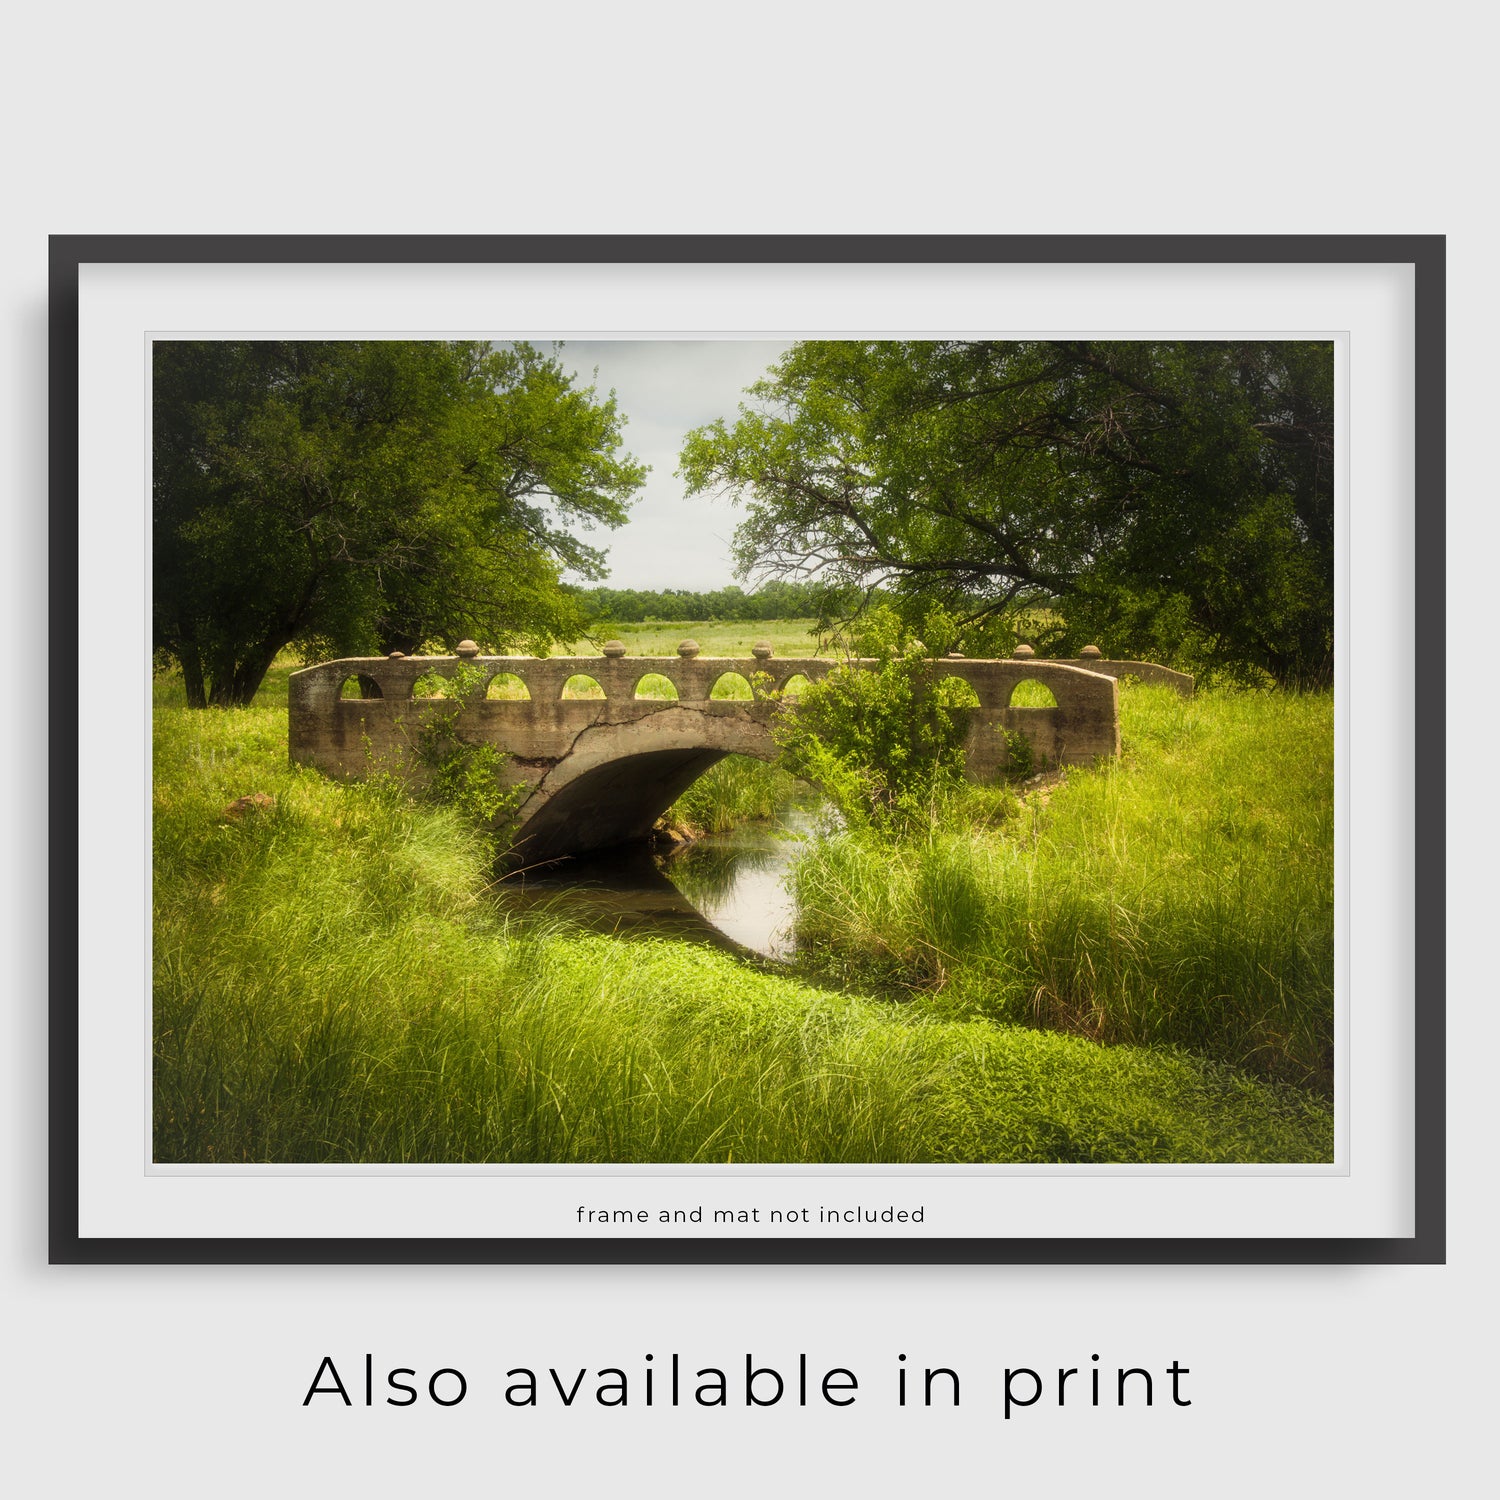 The photograph is beautifully presented as a framed print, showing this Kansas bridge photograph is also available as a paper print. Please note that the frame and mat shown are for display purposes only and are not included in the purchase.